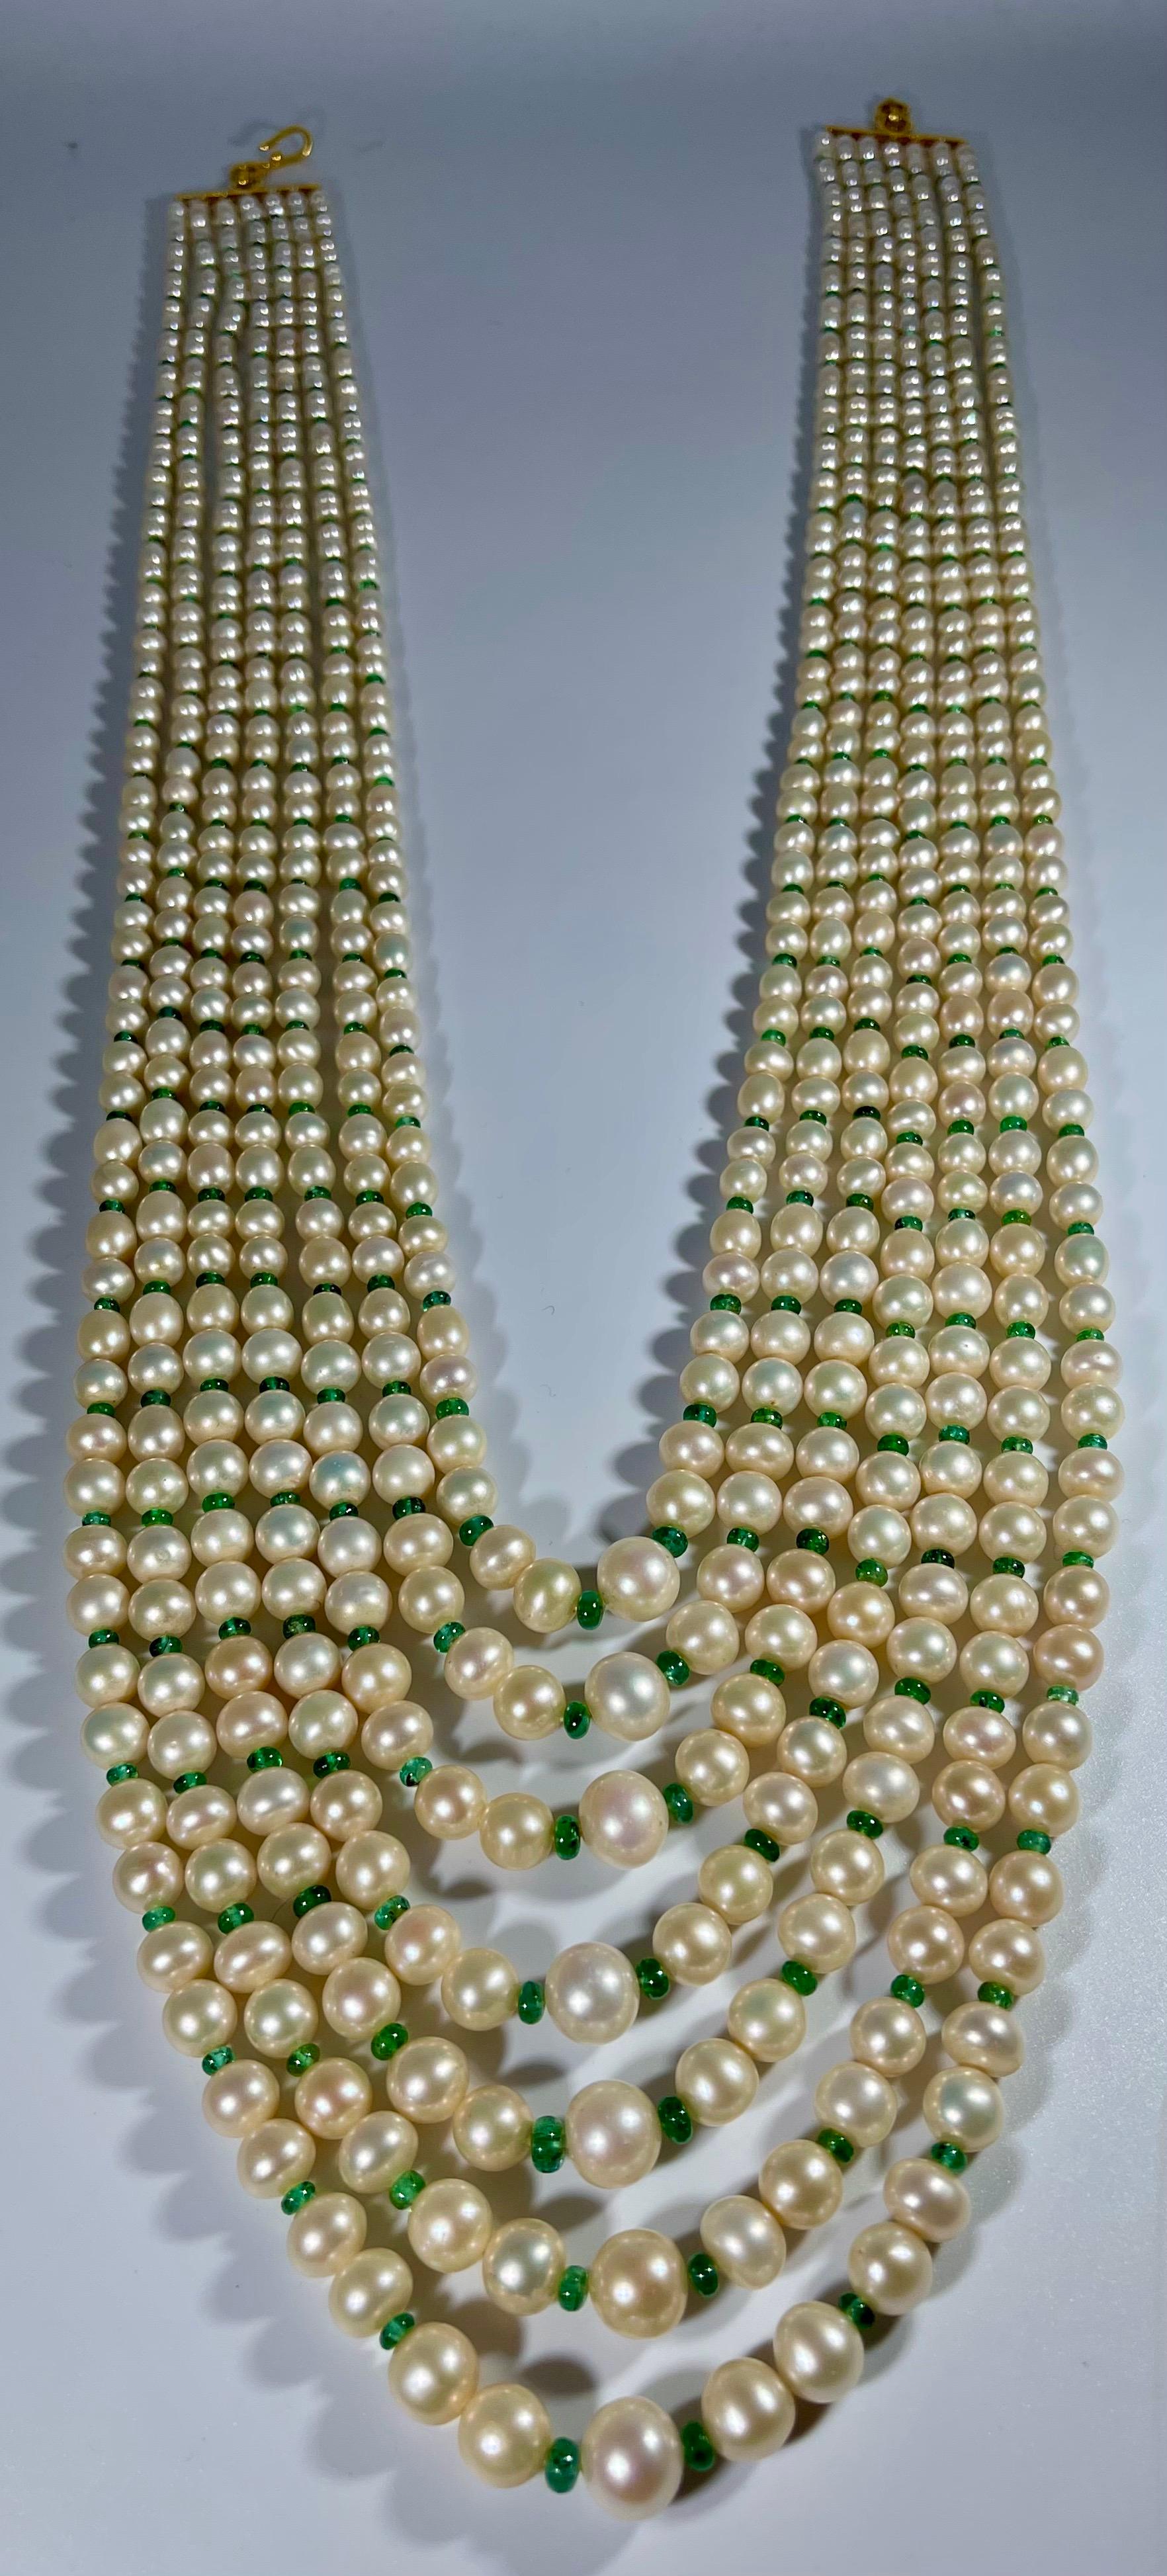 7Layer Fresh Water Pearl , Emerald Bead + 14K Spacer Clasp Opera Length Necklace In Excellent Condition For Sale In New York, NY